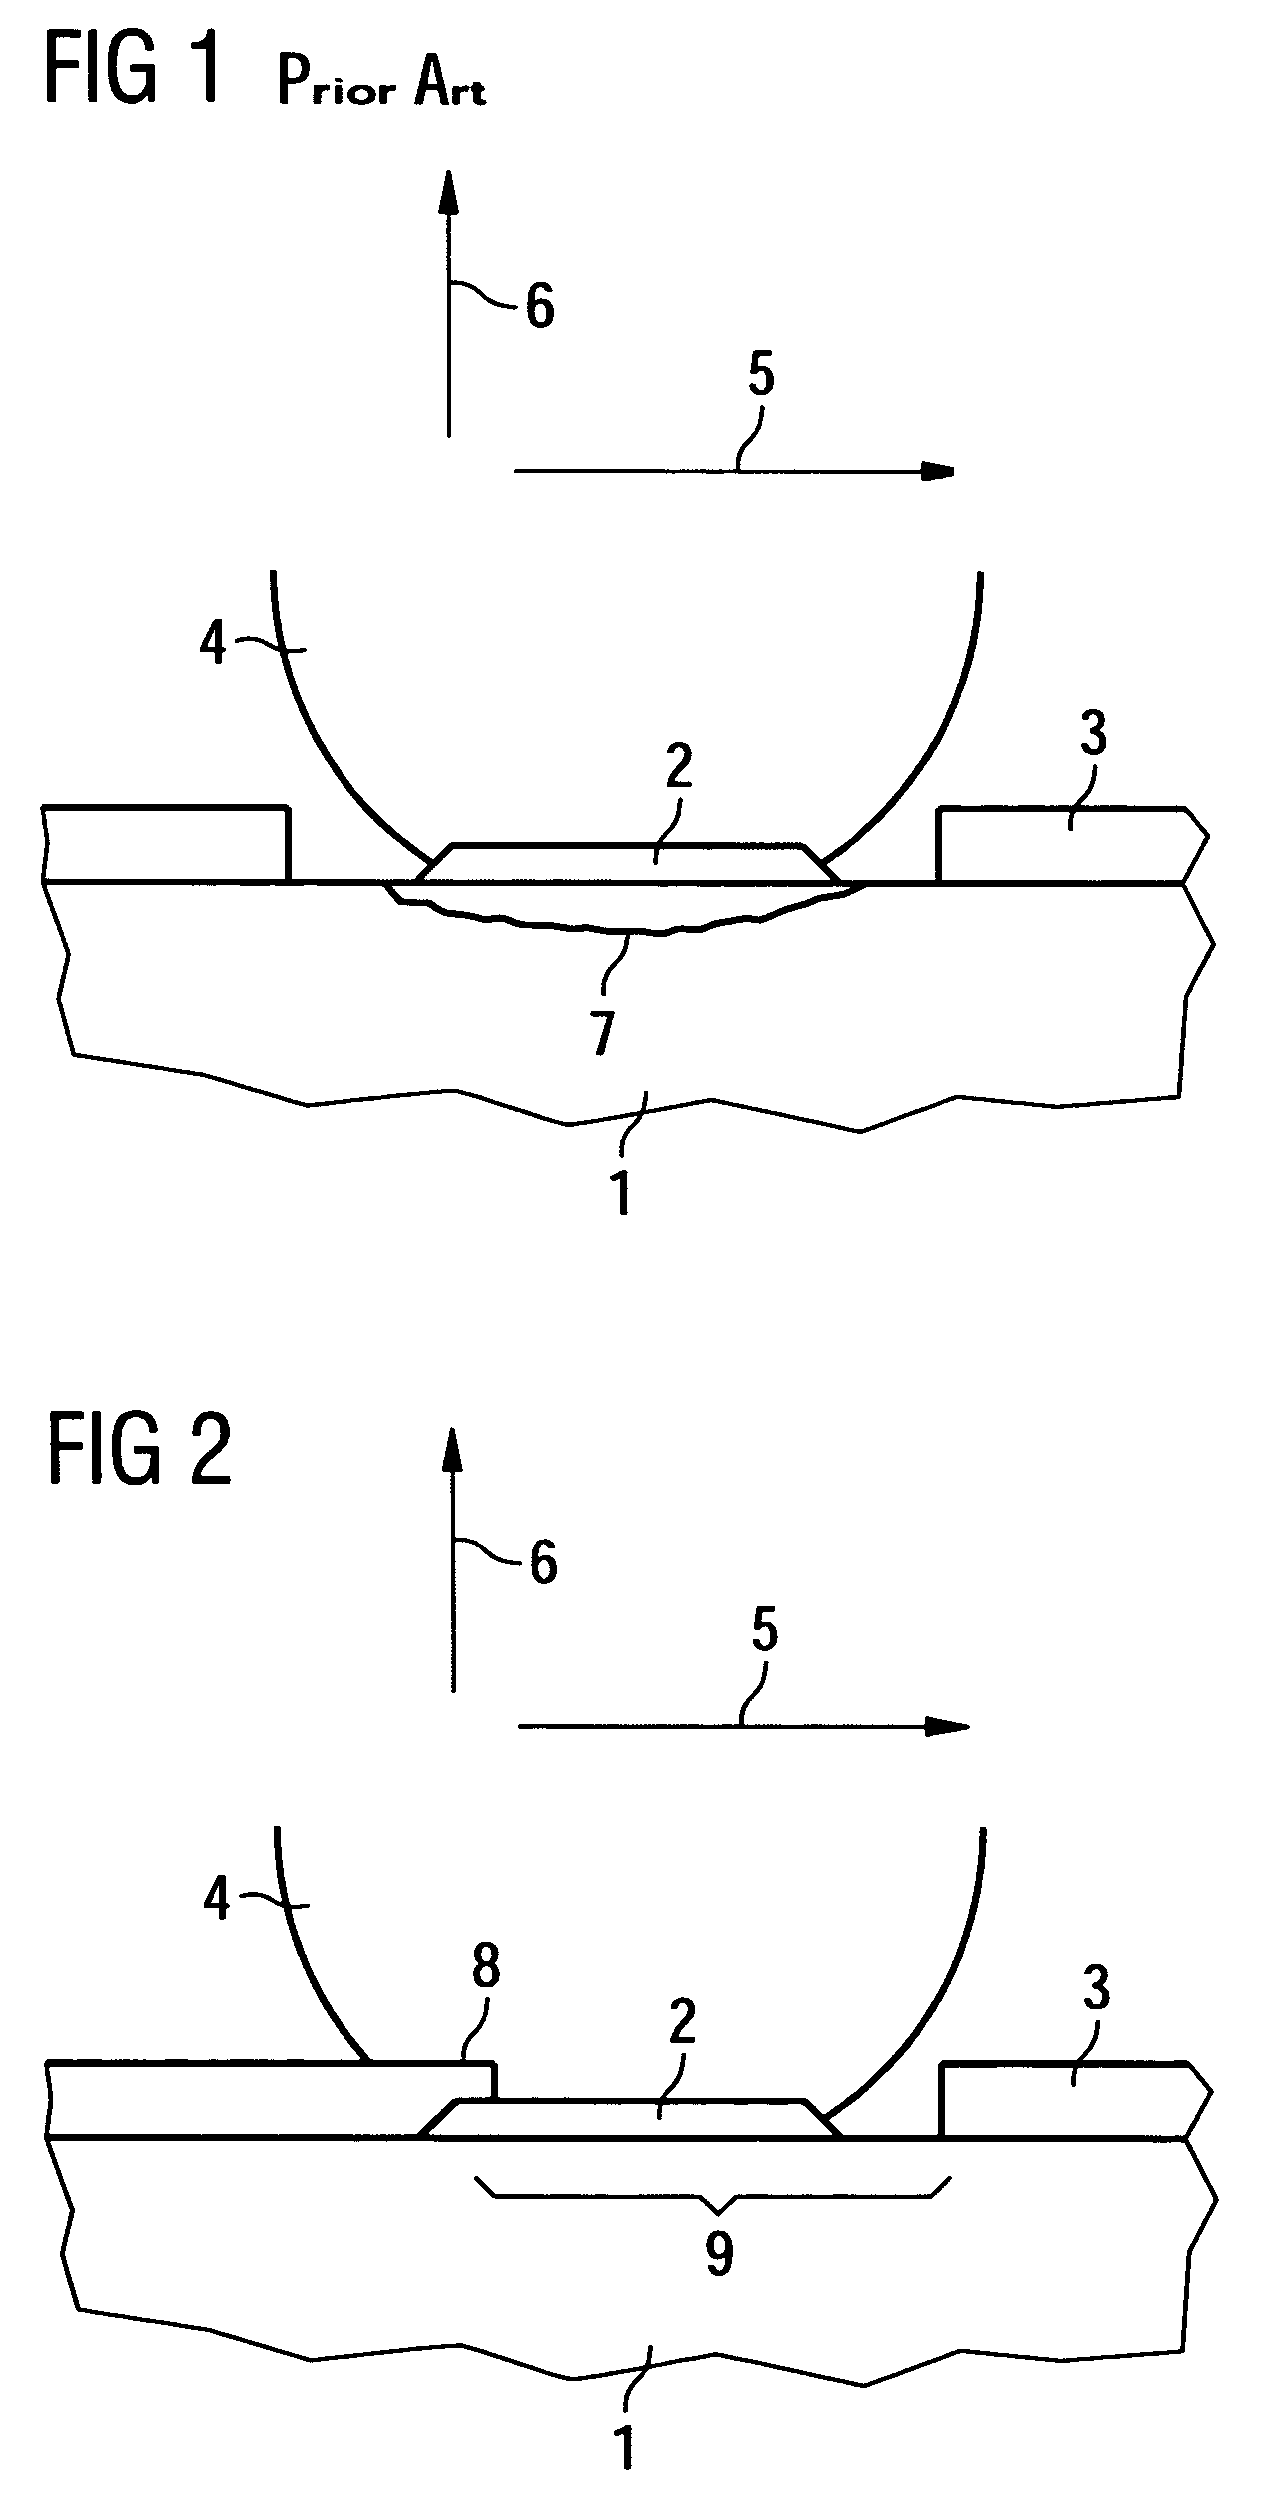 Substrate for producing a soldering connection